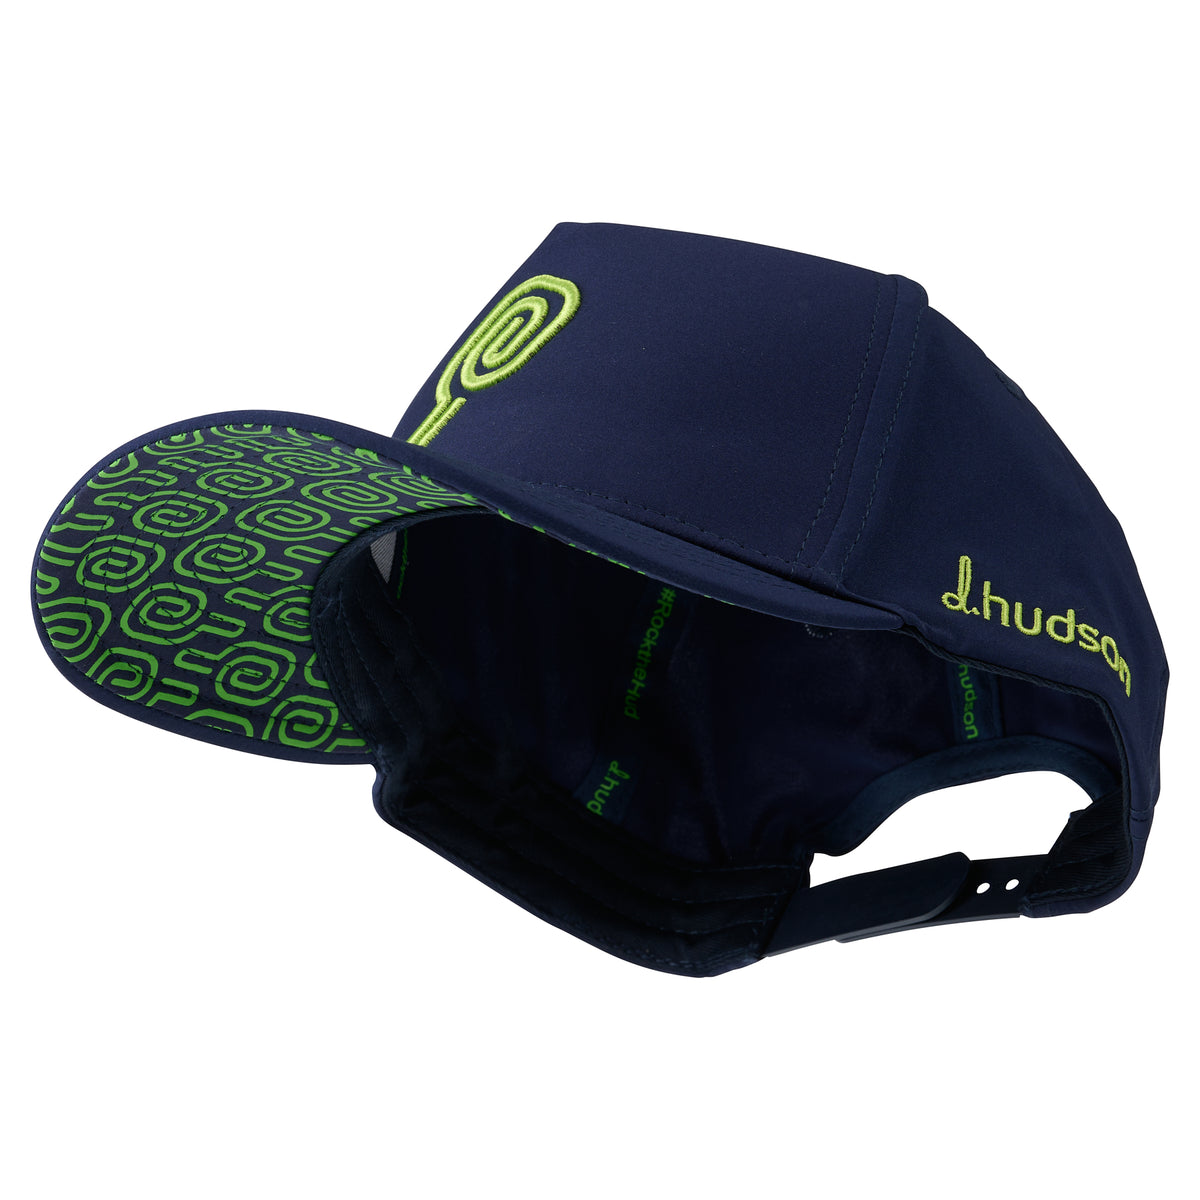 Swirlin' Paddle (Navy/Lime)